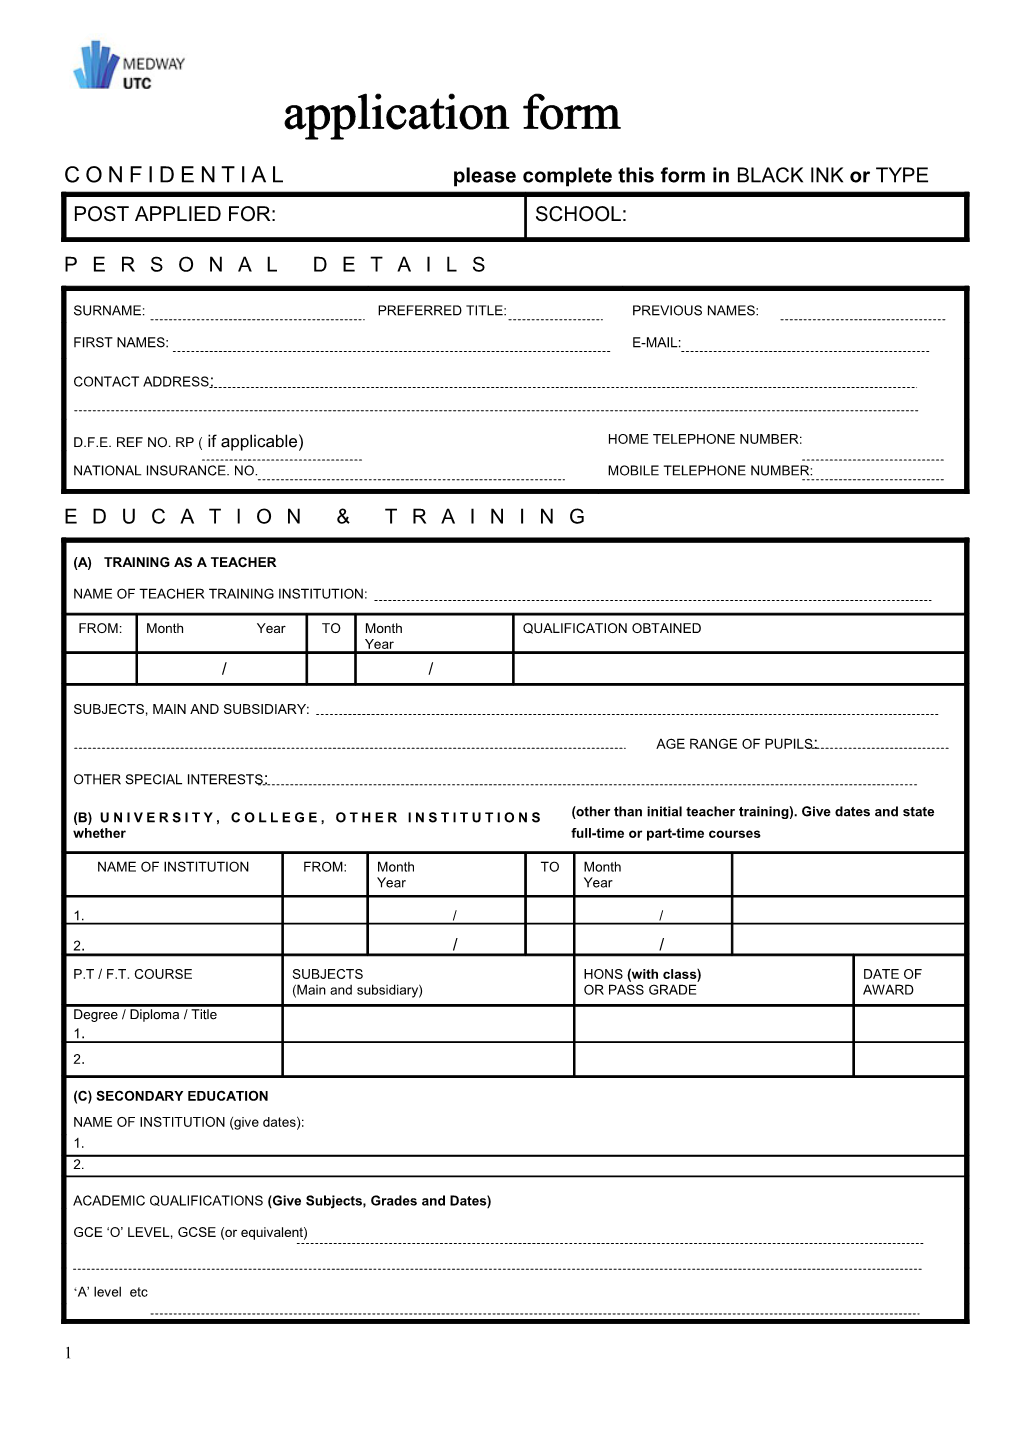 CONFIDENTIAL Please Complete This Form in BLACK INK Or TYPE